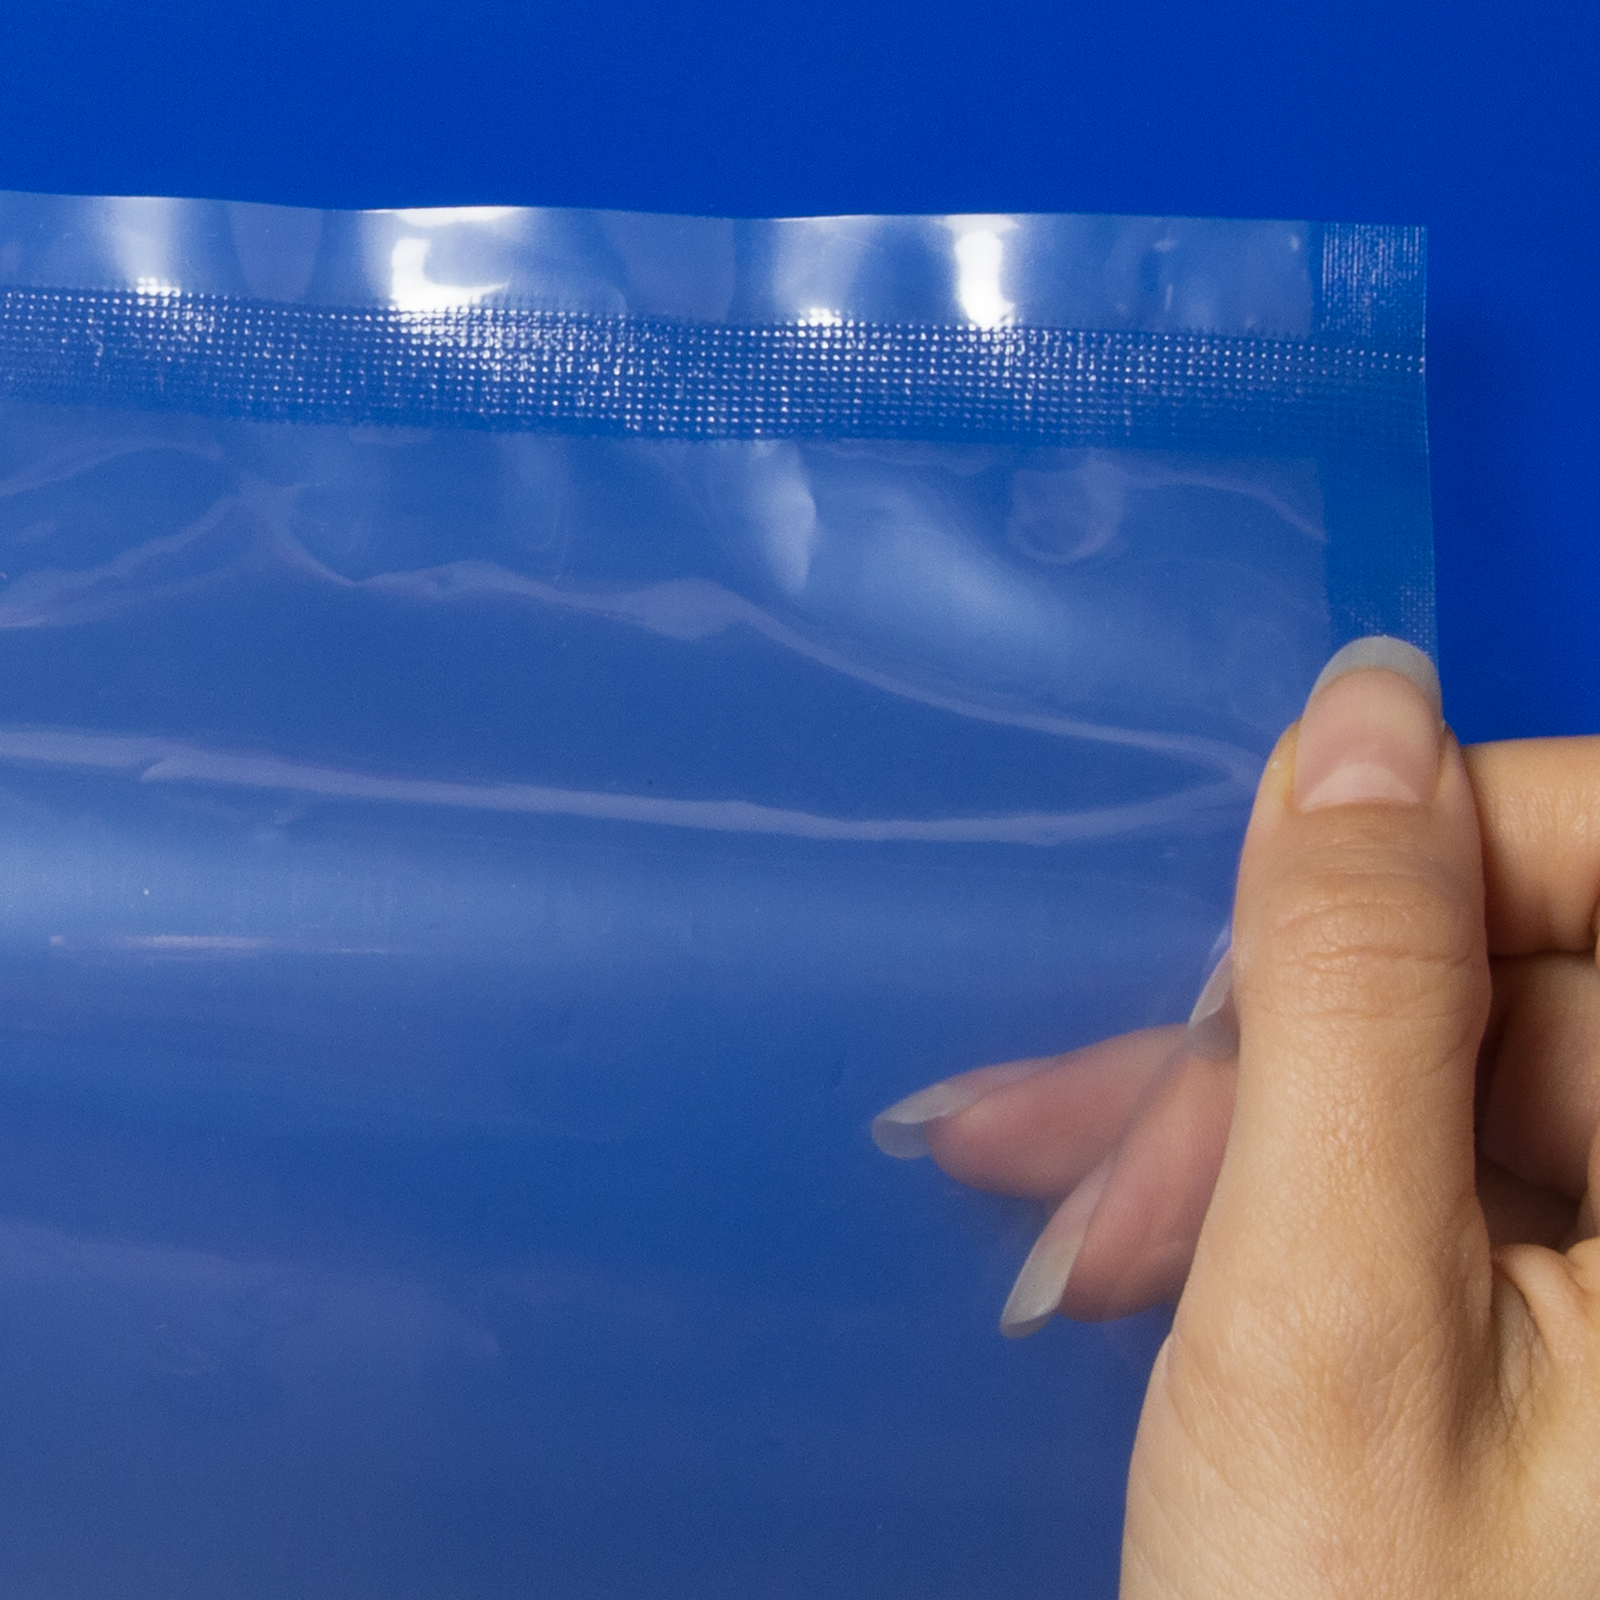 Close up of a hand holding and empty sealed bag  after using a JORESTECH continuous bag sealer. Also shows a close up of the pattern of the seal. Background used for contrast in is blue.